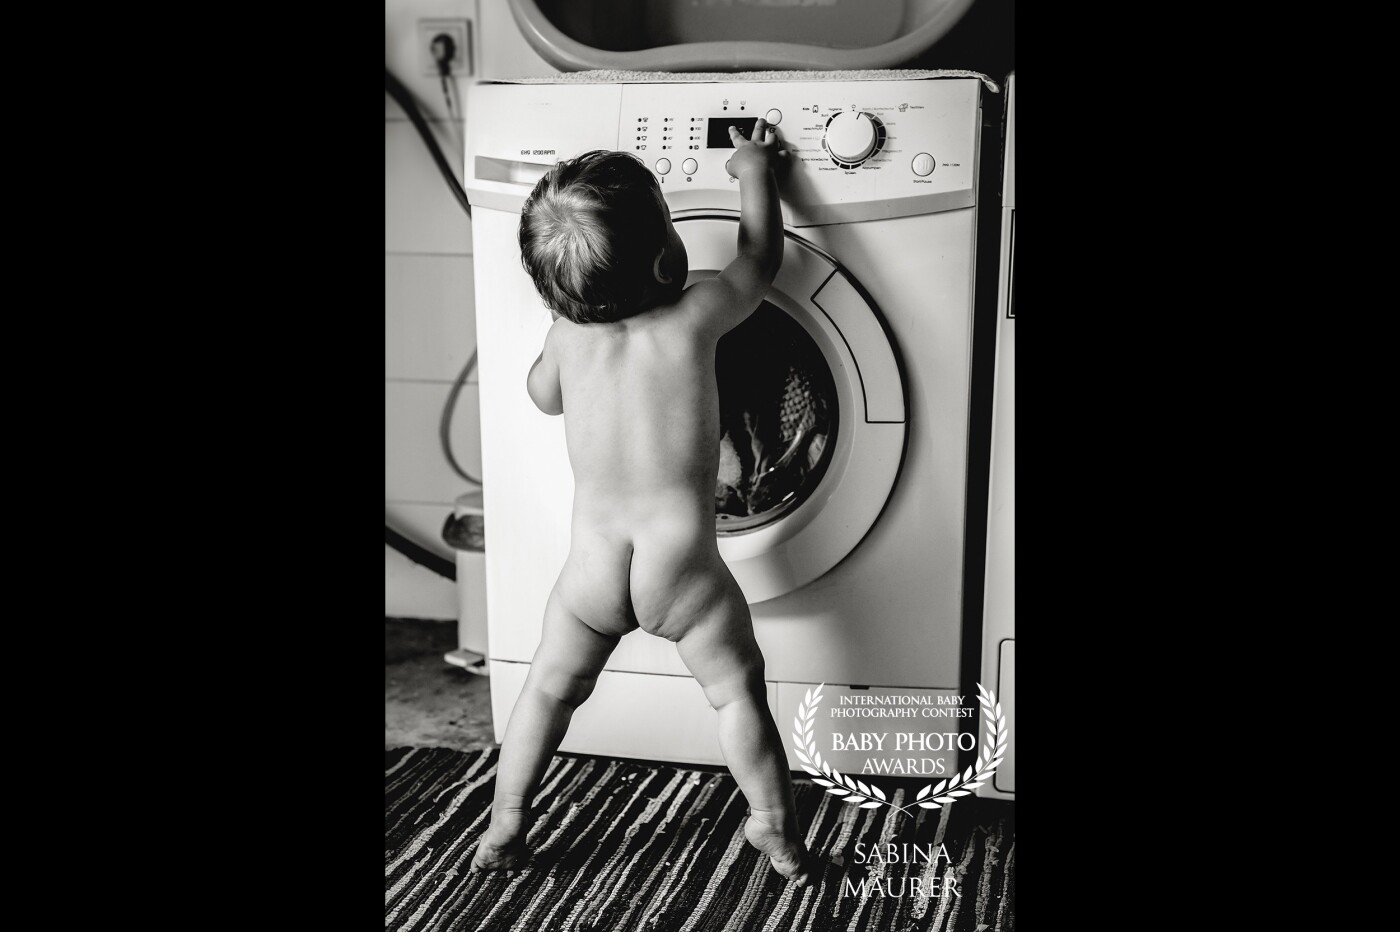 This young man is 13 months old and wants to help his mummy with the laundry. The moment when he reached for the buttons was just perfect for a snapshot.